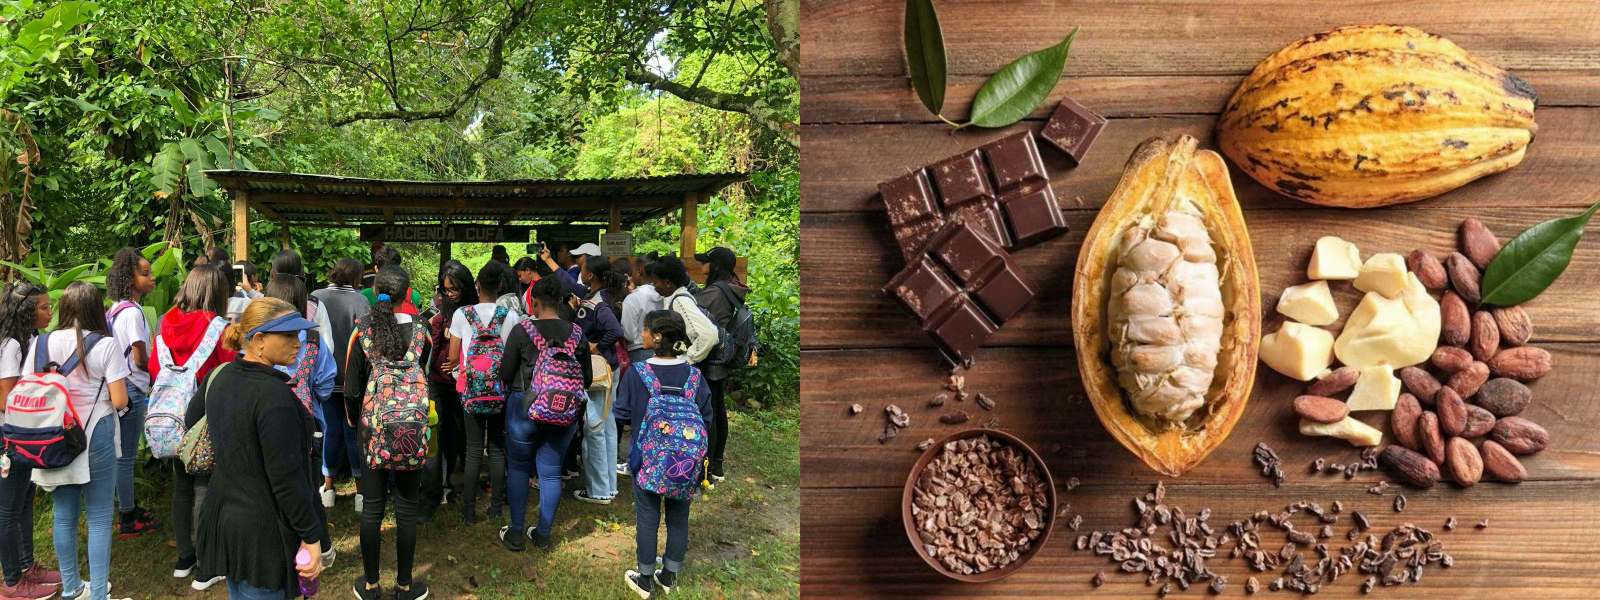 Students taking the cacao tour